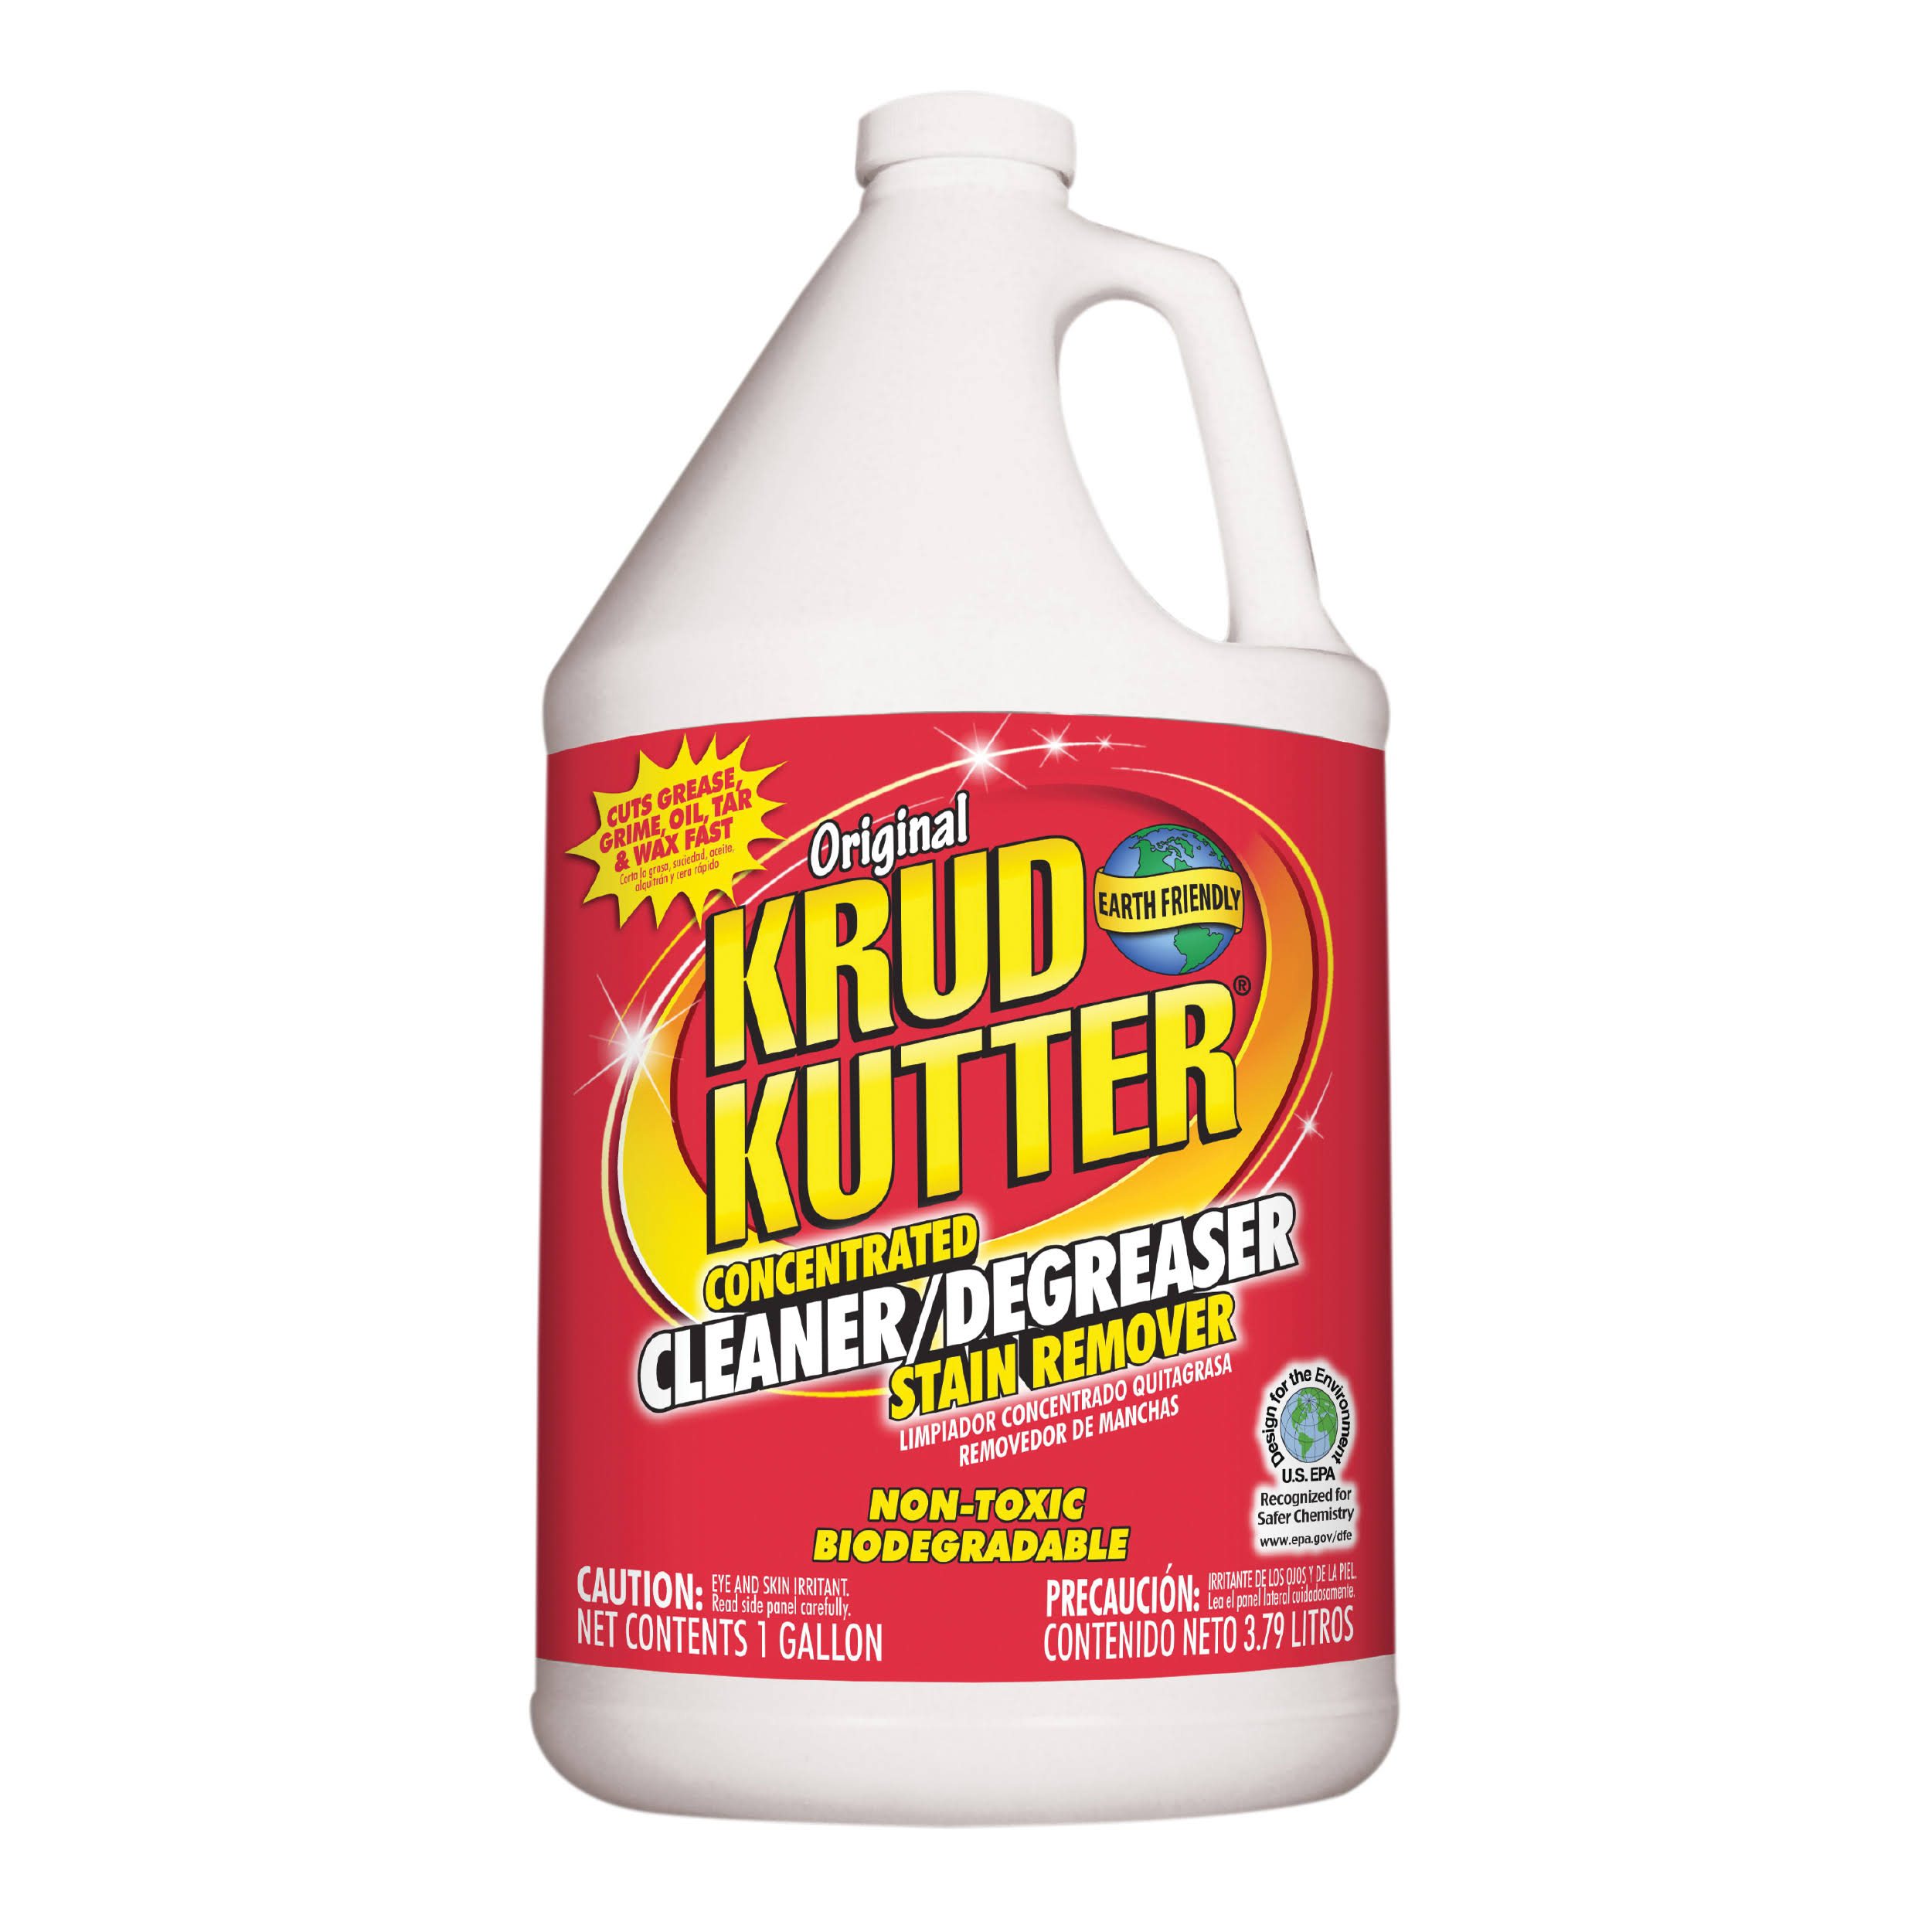 Krud Kutter Clear Original Concentrated Cleaner Degreaser